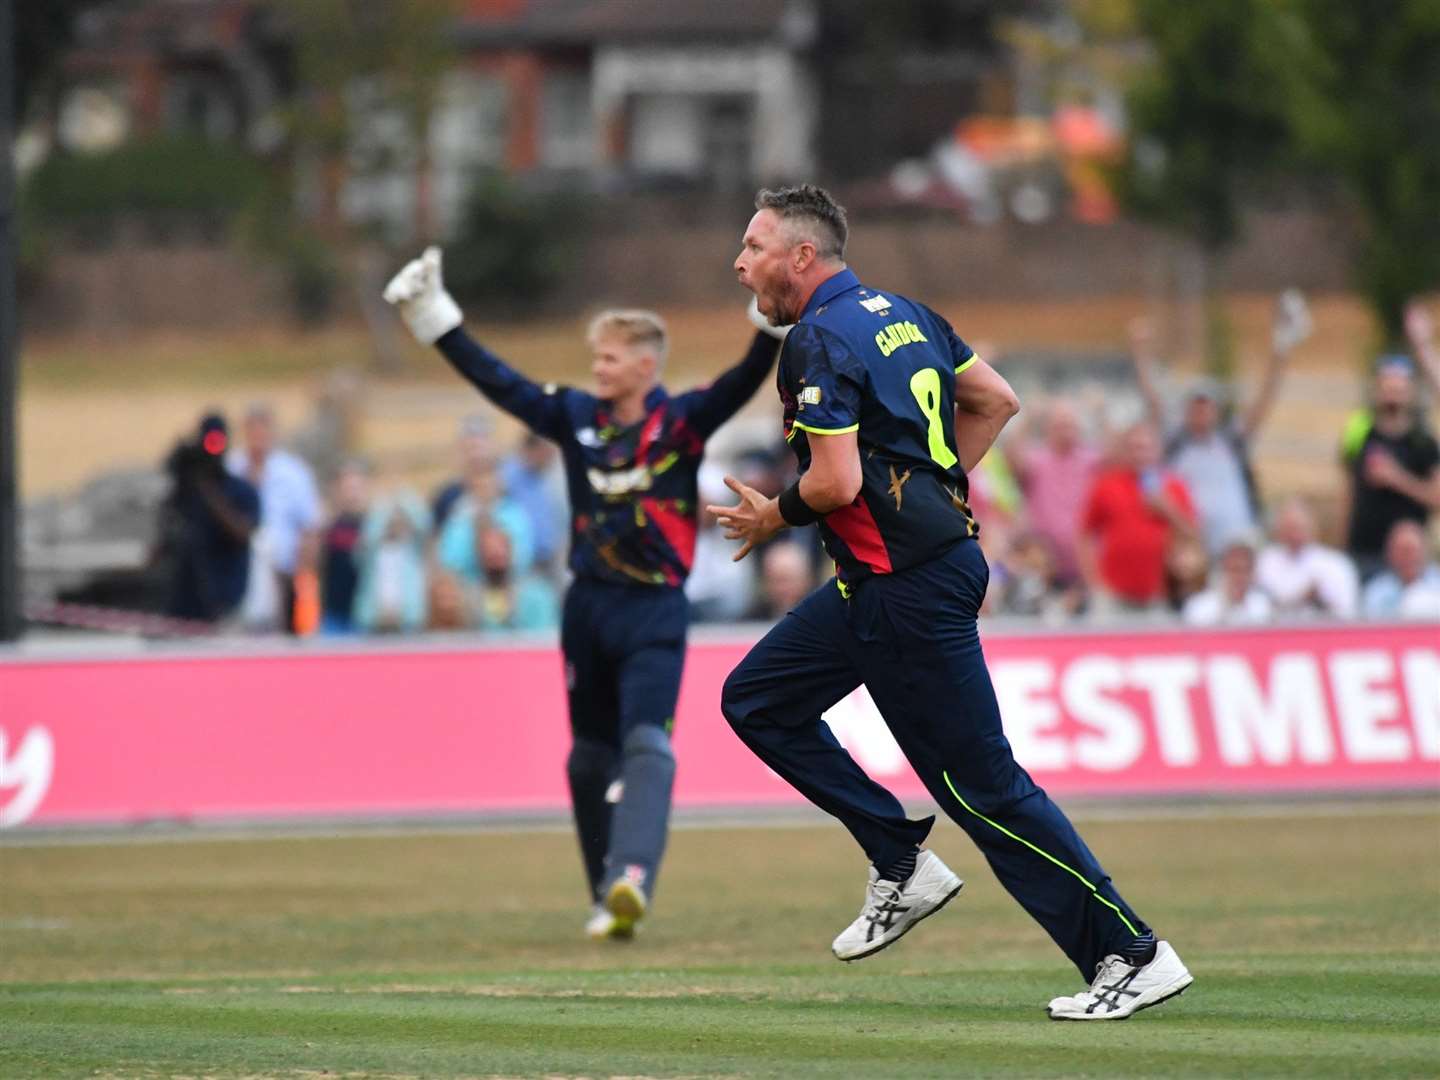 Kent celebrate their victory over Hampshire. Picture: Keith Gillard (3065239)